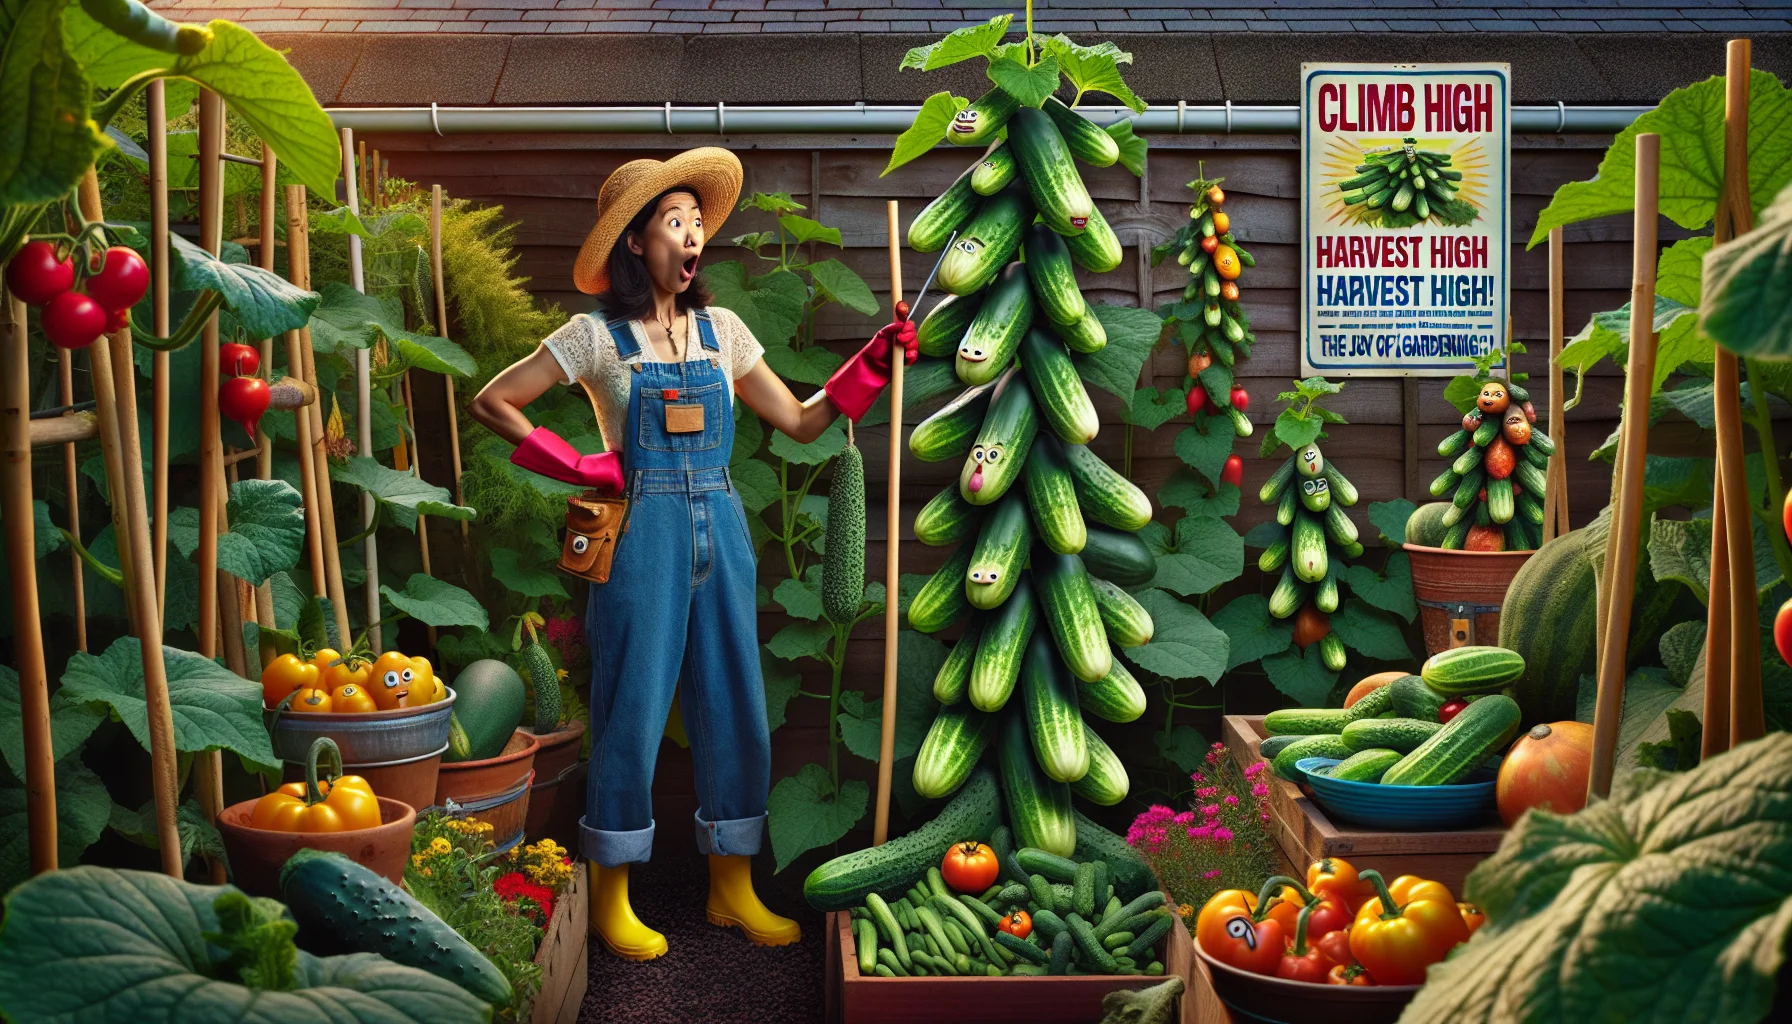 Create a humorous and realistic scene set in a vibrant backyard garden. In the center, a female South Asian gardener wearing straw hat, denim overalls, and bright red gloves is busy staking a towering cucumber plant that has grown as tall as a beanstalk. Her surprised expression hints at the absurdity. Among the ripened cucumber fruits, some wear cartoonish faces, and one is even donning a tiny top hat. To the side, a poster stands, saying 'Climb High, Harvest High - The Joy of Gardening!' Attractively arranged various vegetable plants surround the scene, staining the garden with bold summer hues.